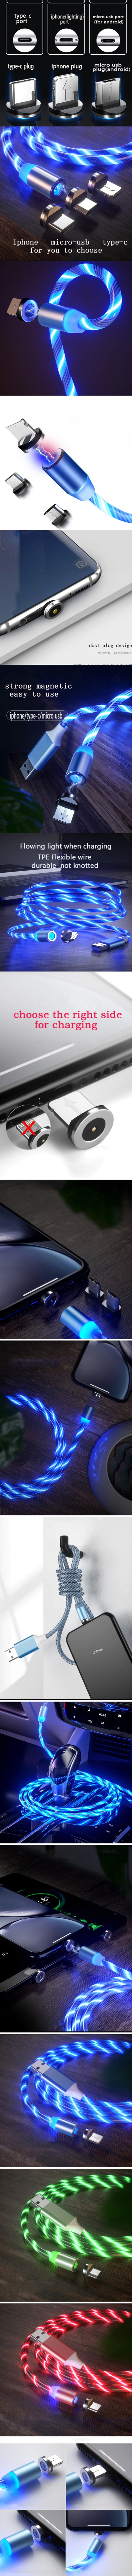 Glowing Magnetic Charging Cable, Luminous Magnetic Cable, LED Magnetic Cable,